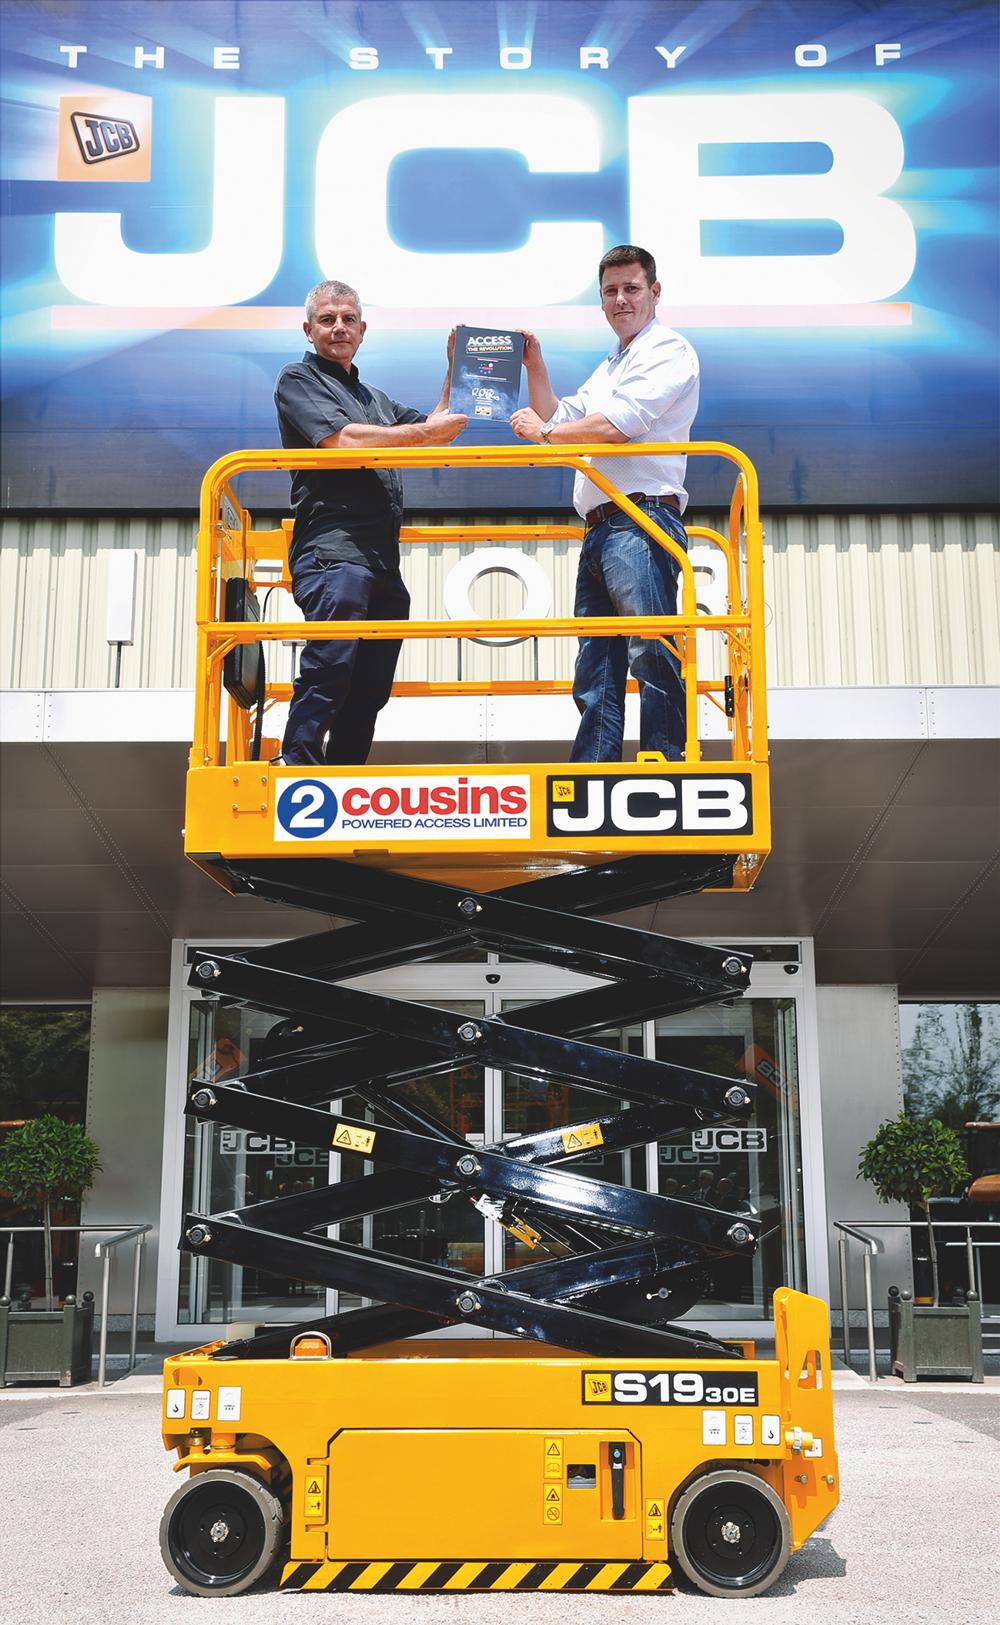 2 Cousins Powered Access has become the first ever JCB scissor lift customer in the world following the launch of JCB’s Access division